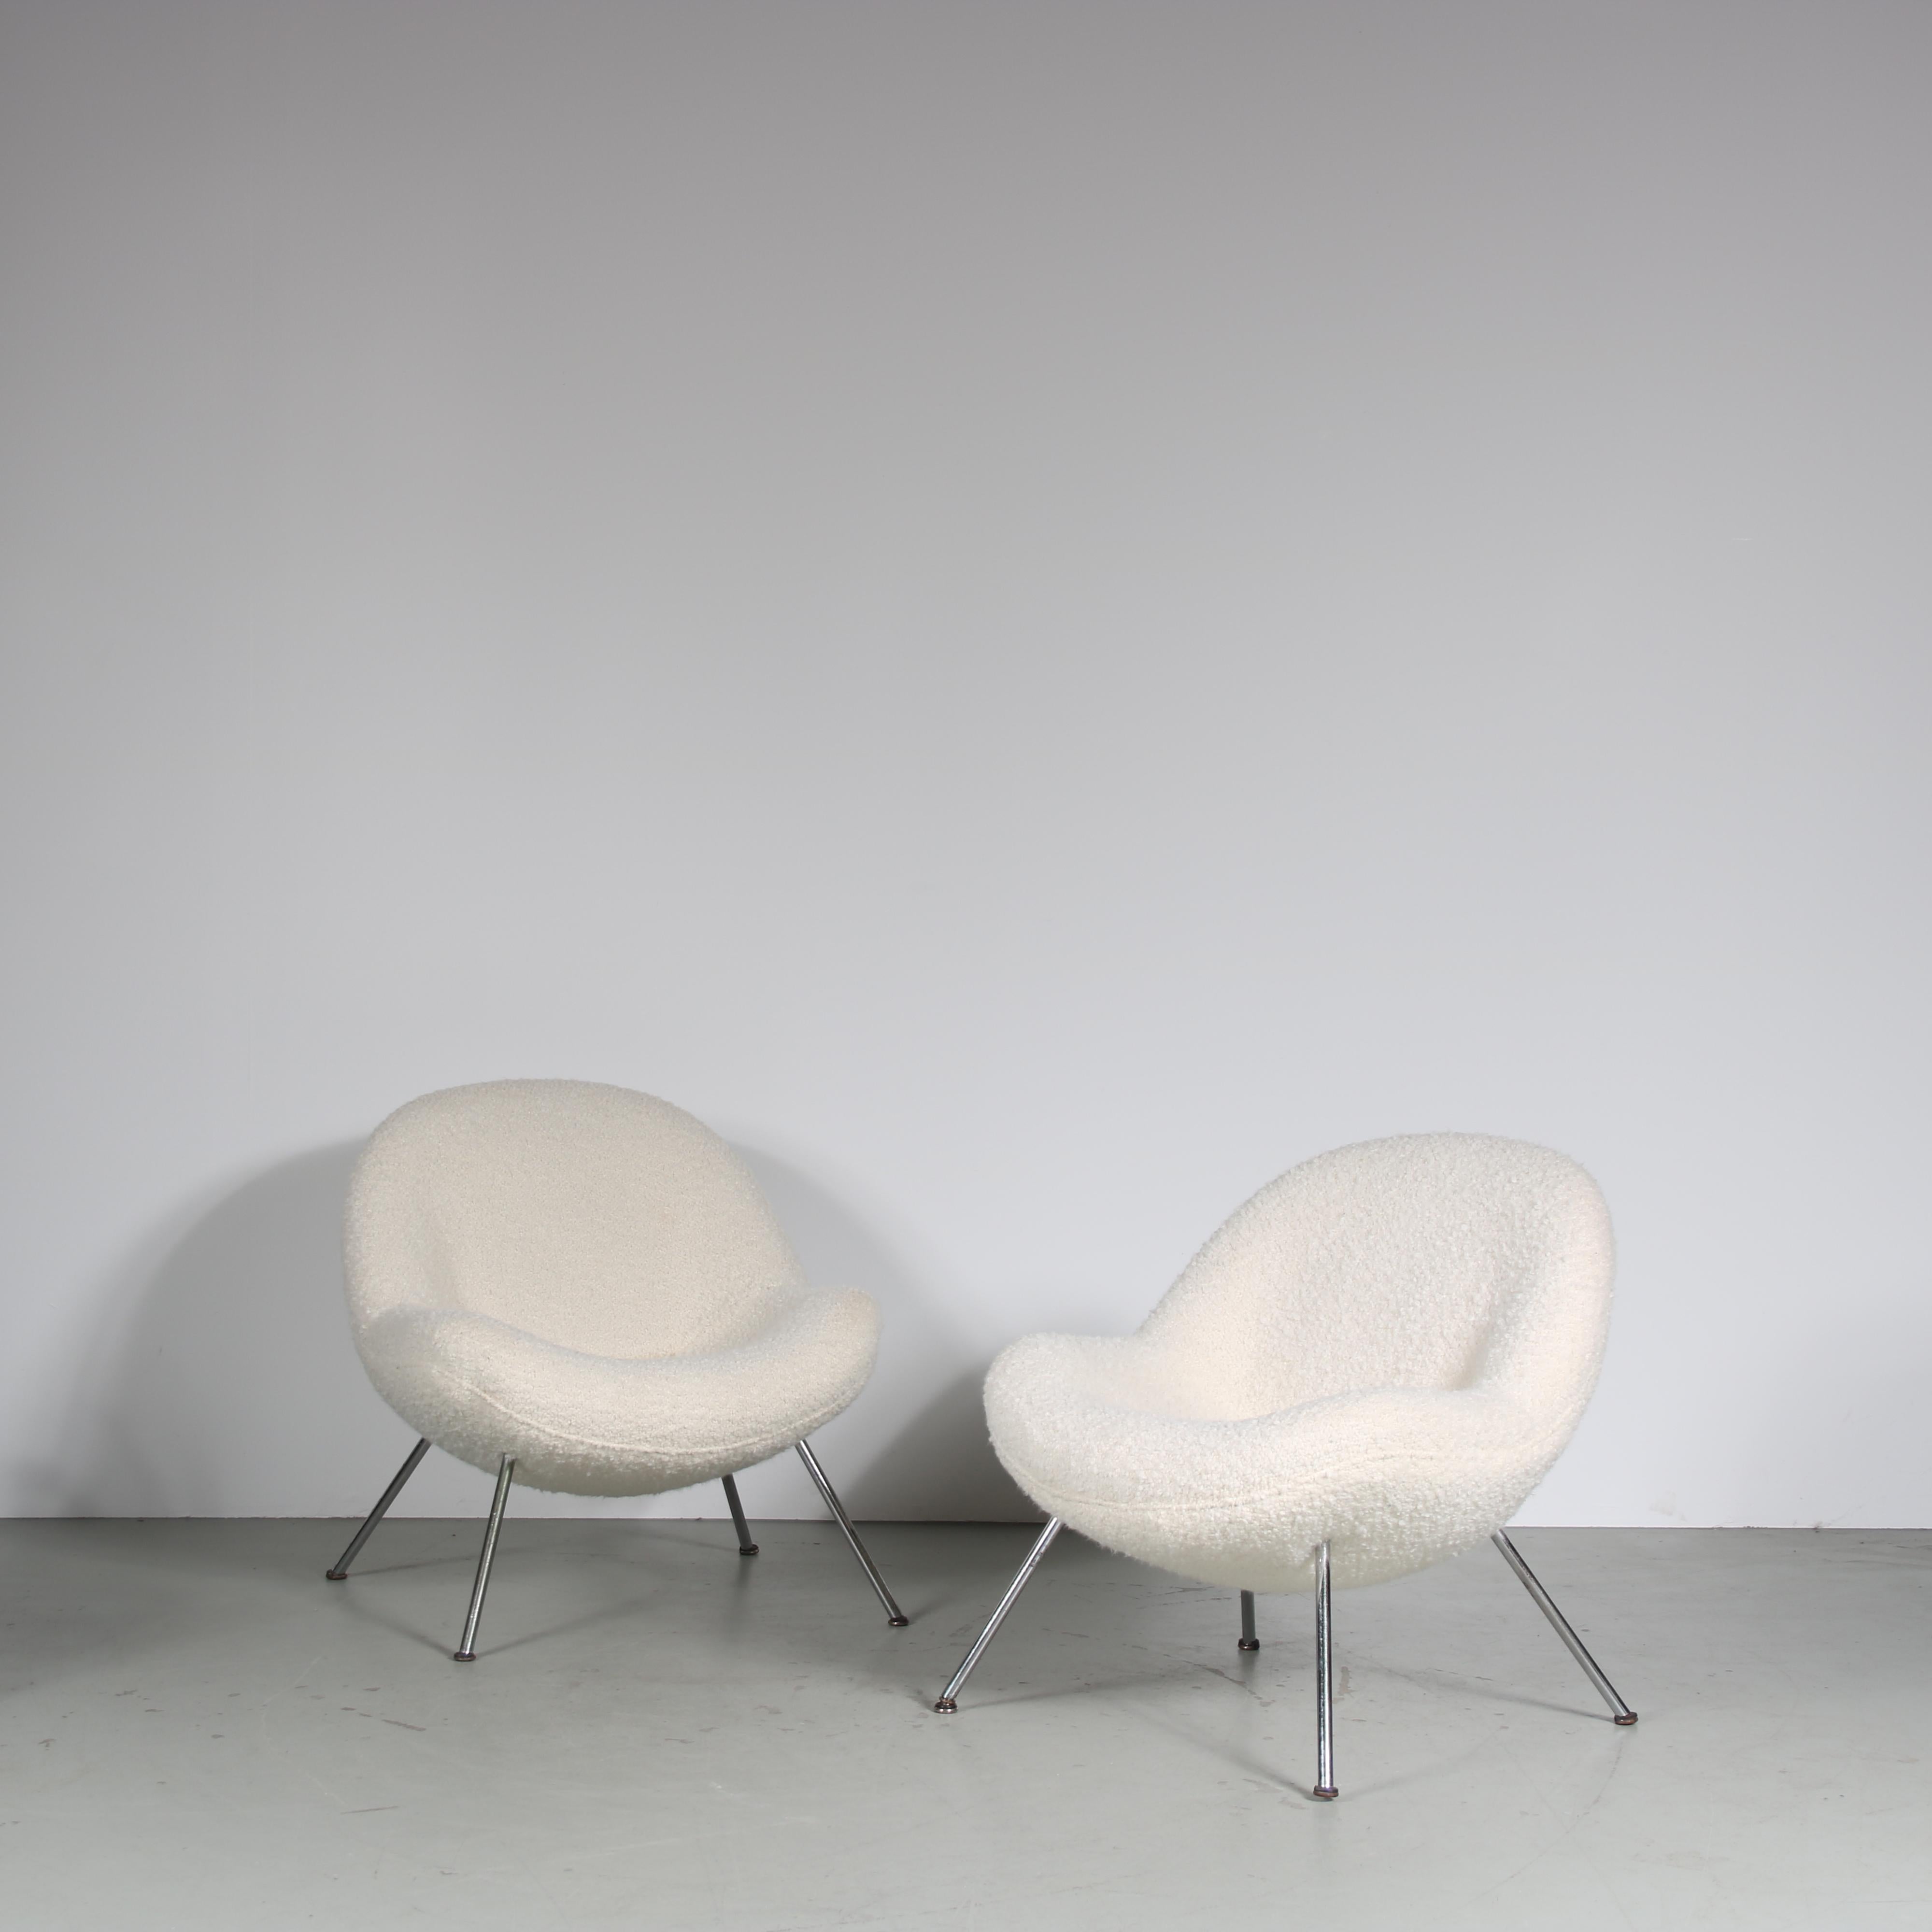 A fantastic pair of so called “Egg Chairs”, designed by Fritz Neth and manufactured by Correcta in Germany around 1950.

This inviting chairs have a very nice appeal, their rounded shapes and soft bouclé upholstery make them a beautiful and